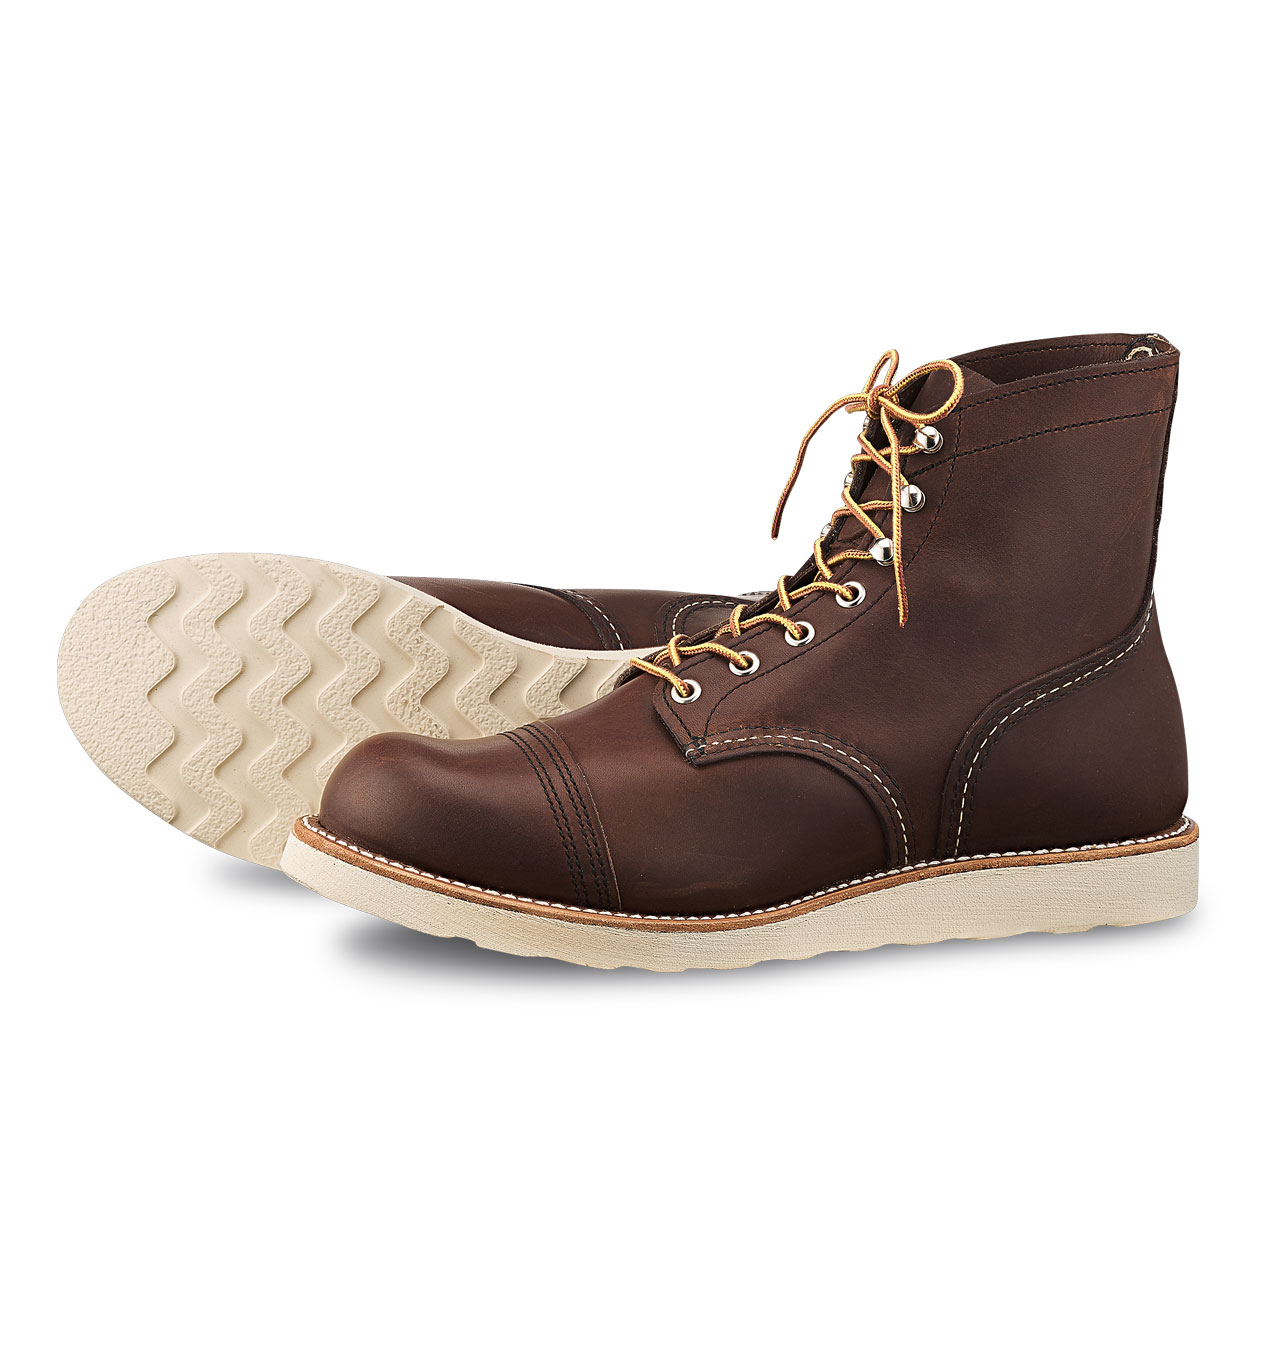 Red Wing Shoes 8088 Iron Ranger - Amber Harness 